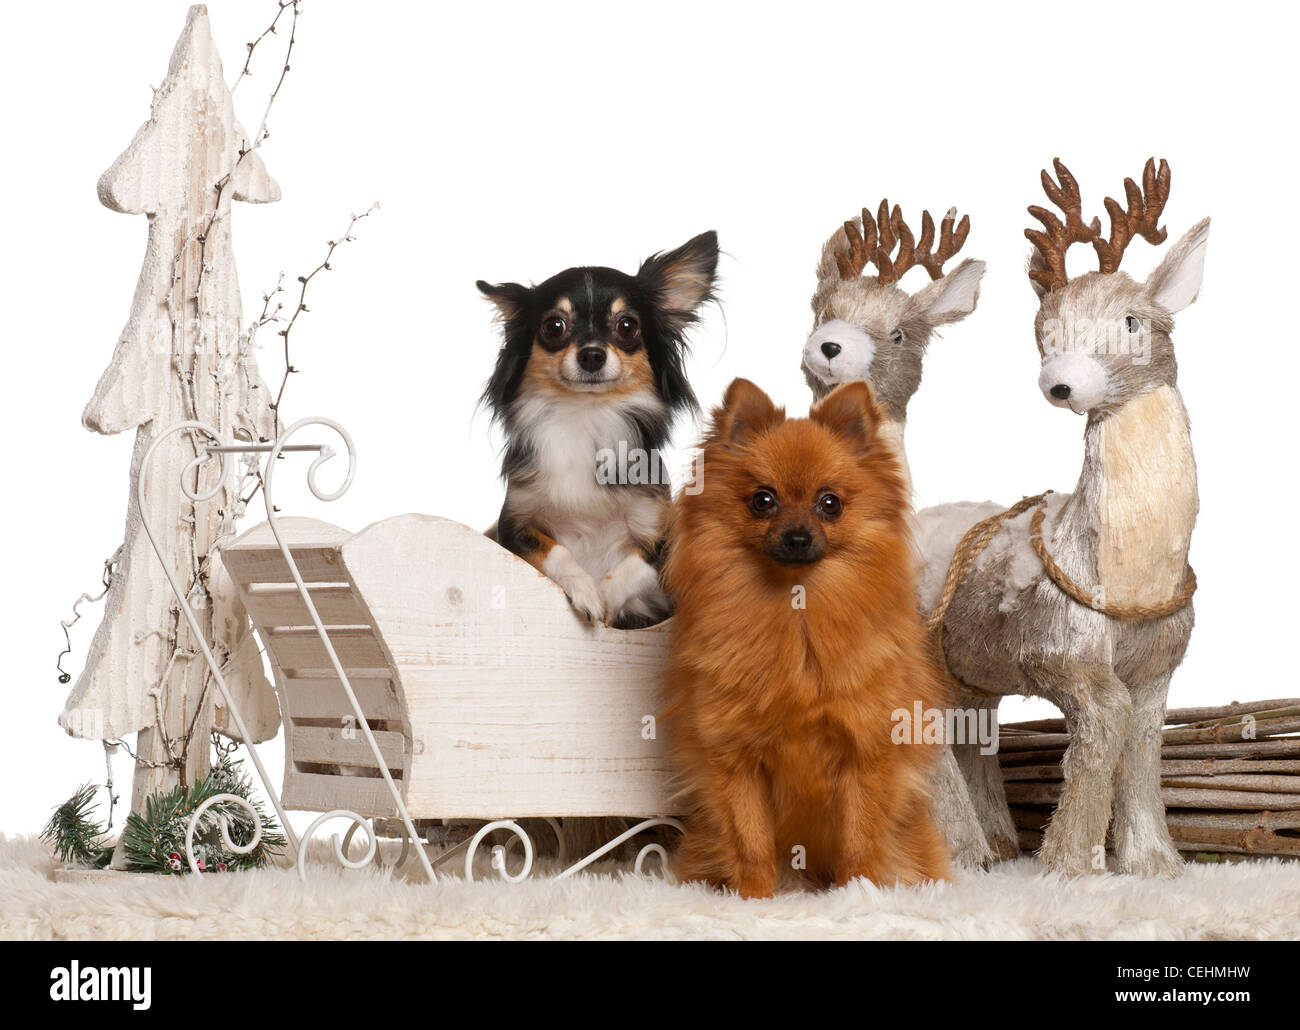 Chihuahua, 3 years old and German Spitz, 2 years old, in Christmas sleigh in front of white background Stock Photo